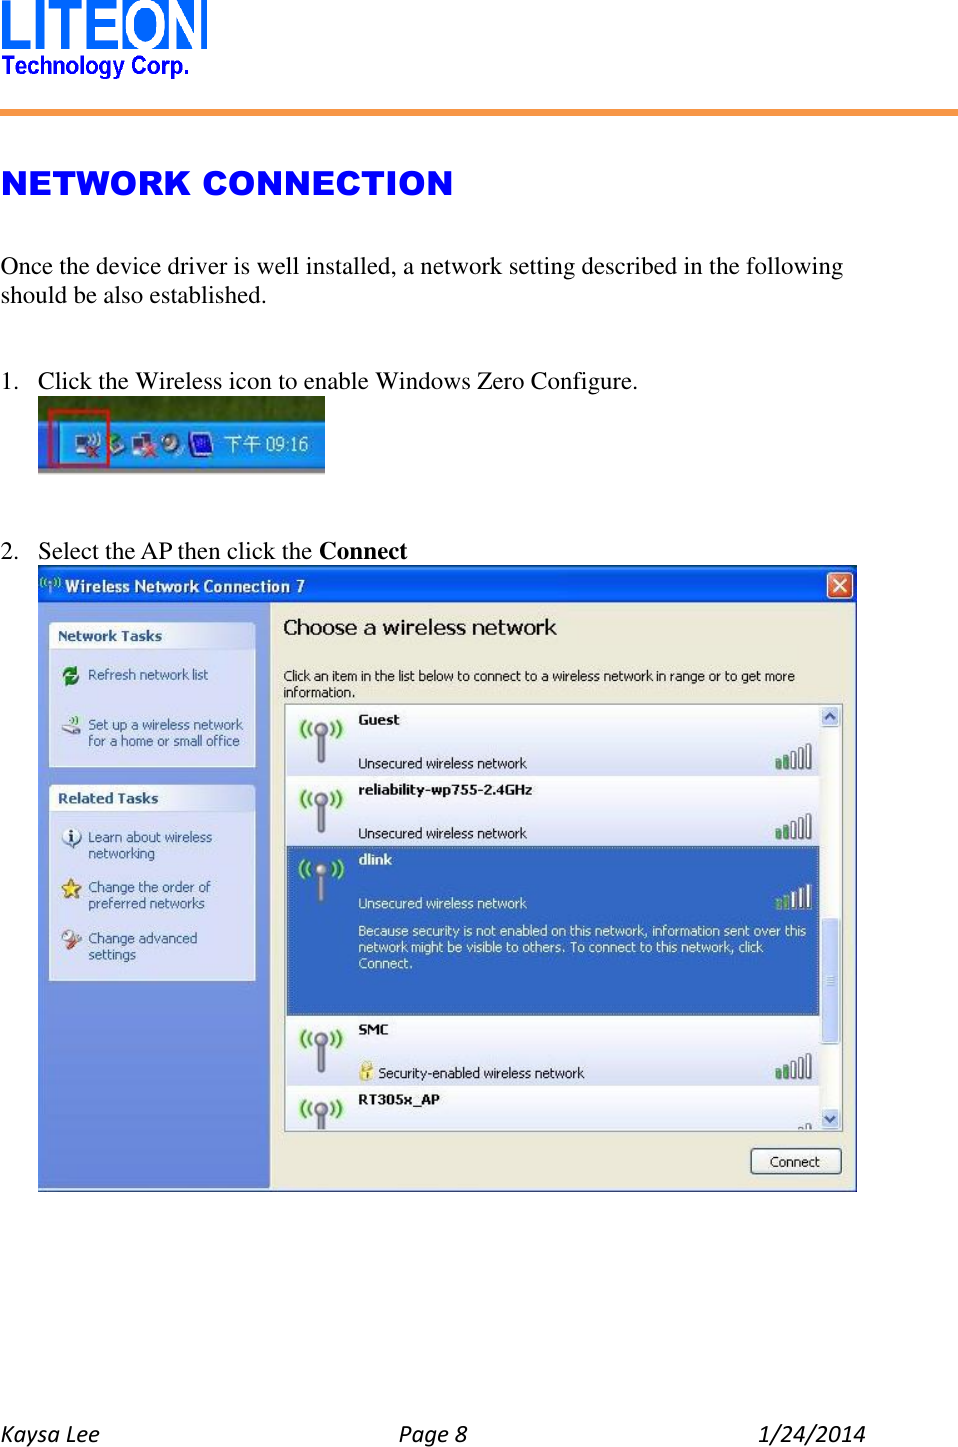   Kaysa Lee  Page 8  1/24/2014    NETWORK CONNECTION  Once the device driver is well installed, a network setting described in the following should be also established.   1. Click the Wireless icon to enable Windows Zero Configure.    2. Select the AP then click the Connect  